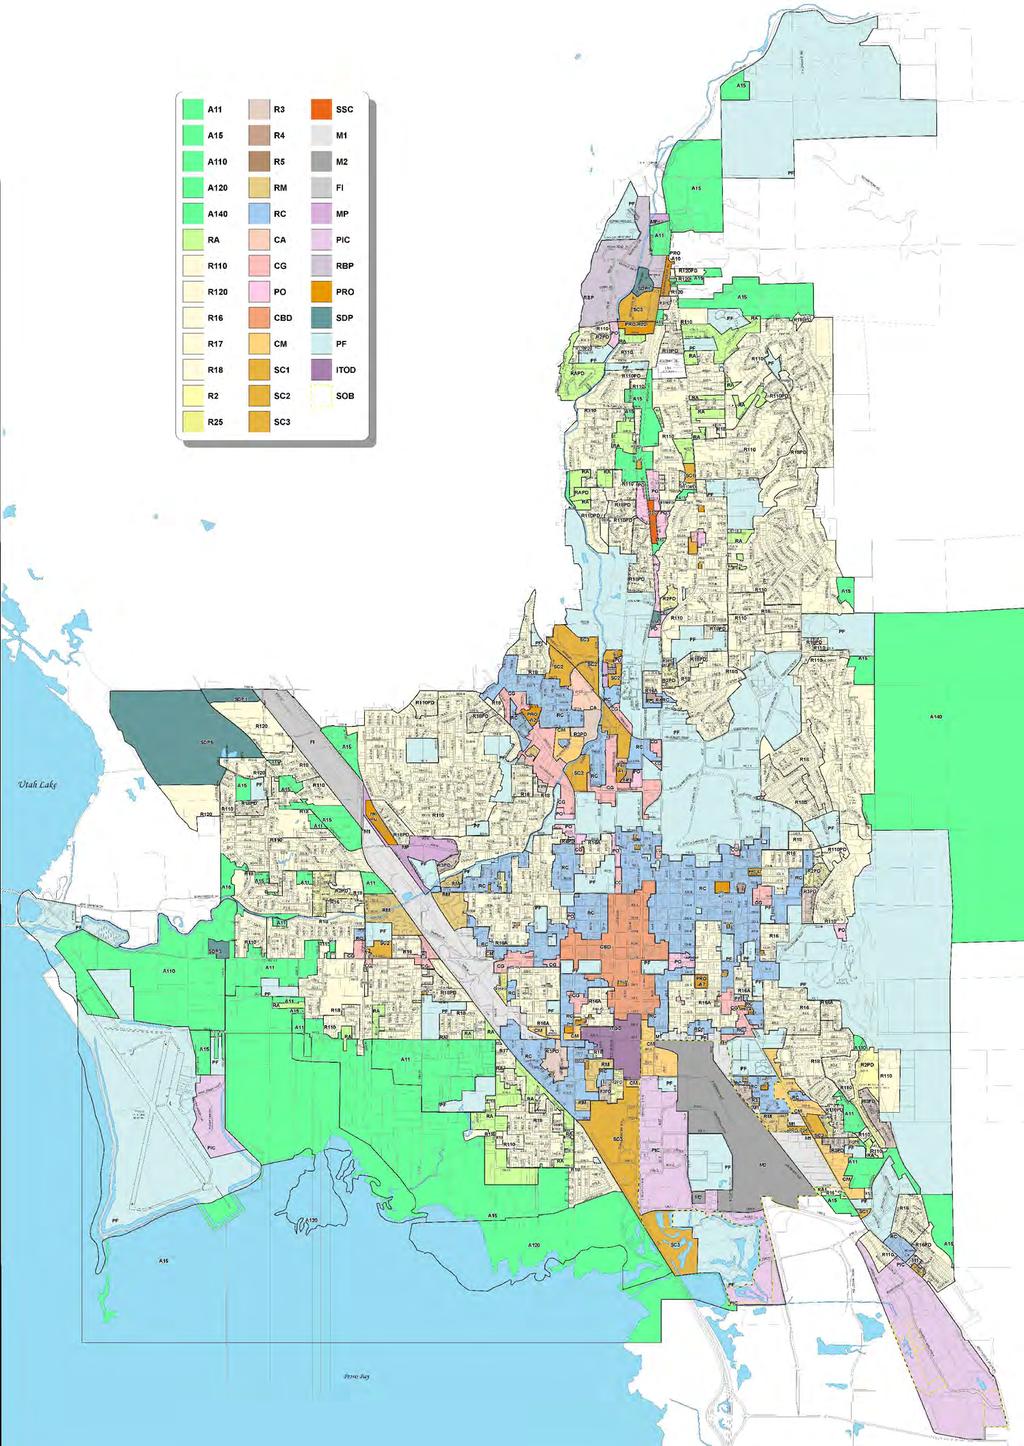 September, 011 SCALE: N.T.S NORTH PROVO CITY TRANSPORTATION MASTER PLAN CURRENT ZONING FIG 01.